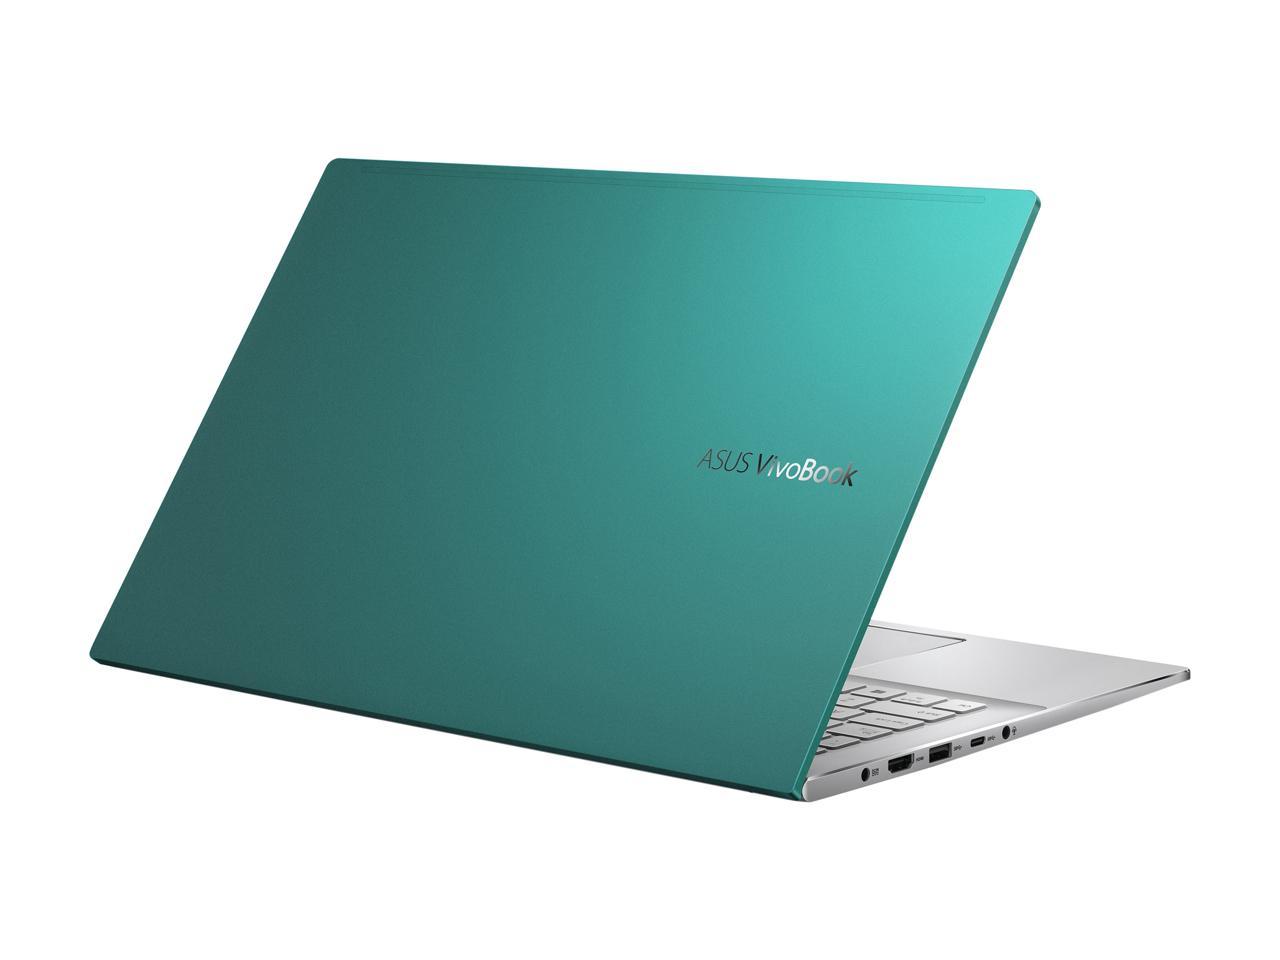 ASUS VivoBook S15 S533 Thin and Light Laptop, 15.6" FHD, Intel Core i5-10210U CPU, 8 GB DDR4 RAM, 512 GB PCIe SSD, Windows 10 Home, S533FA-DS51-GN, Gaia Green